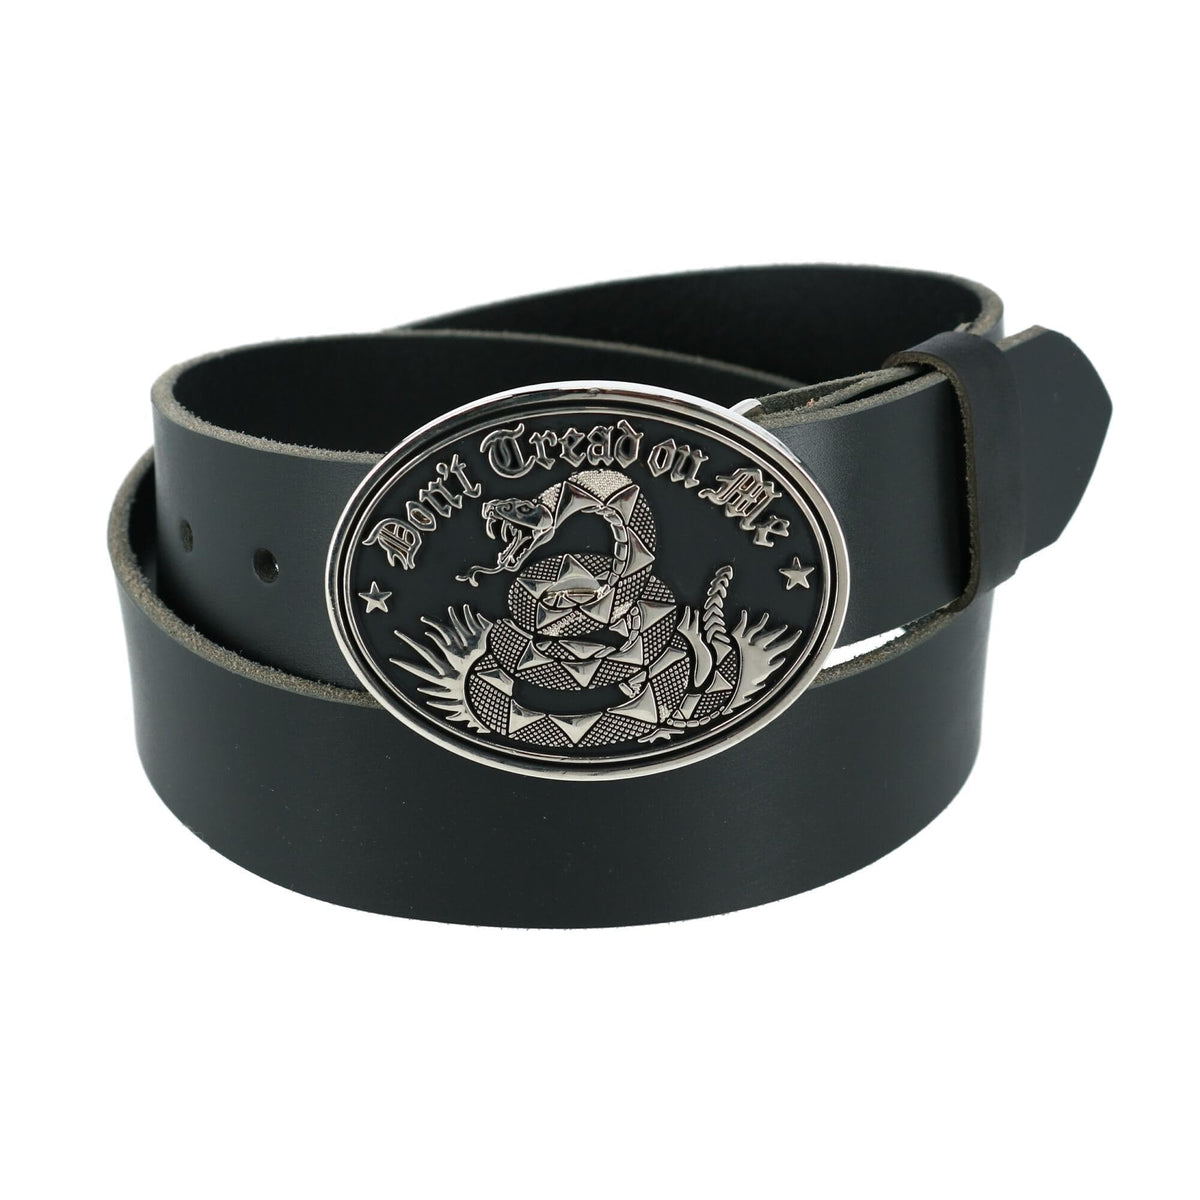 Men's Bridle Belt with Don't Tread on Me Buckle (2 Buckle Set) by CTM ...